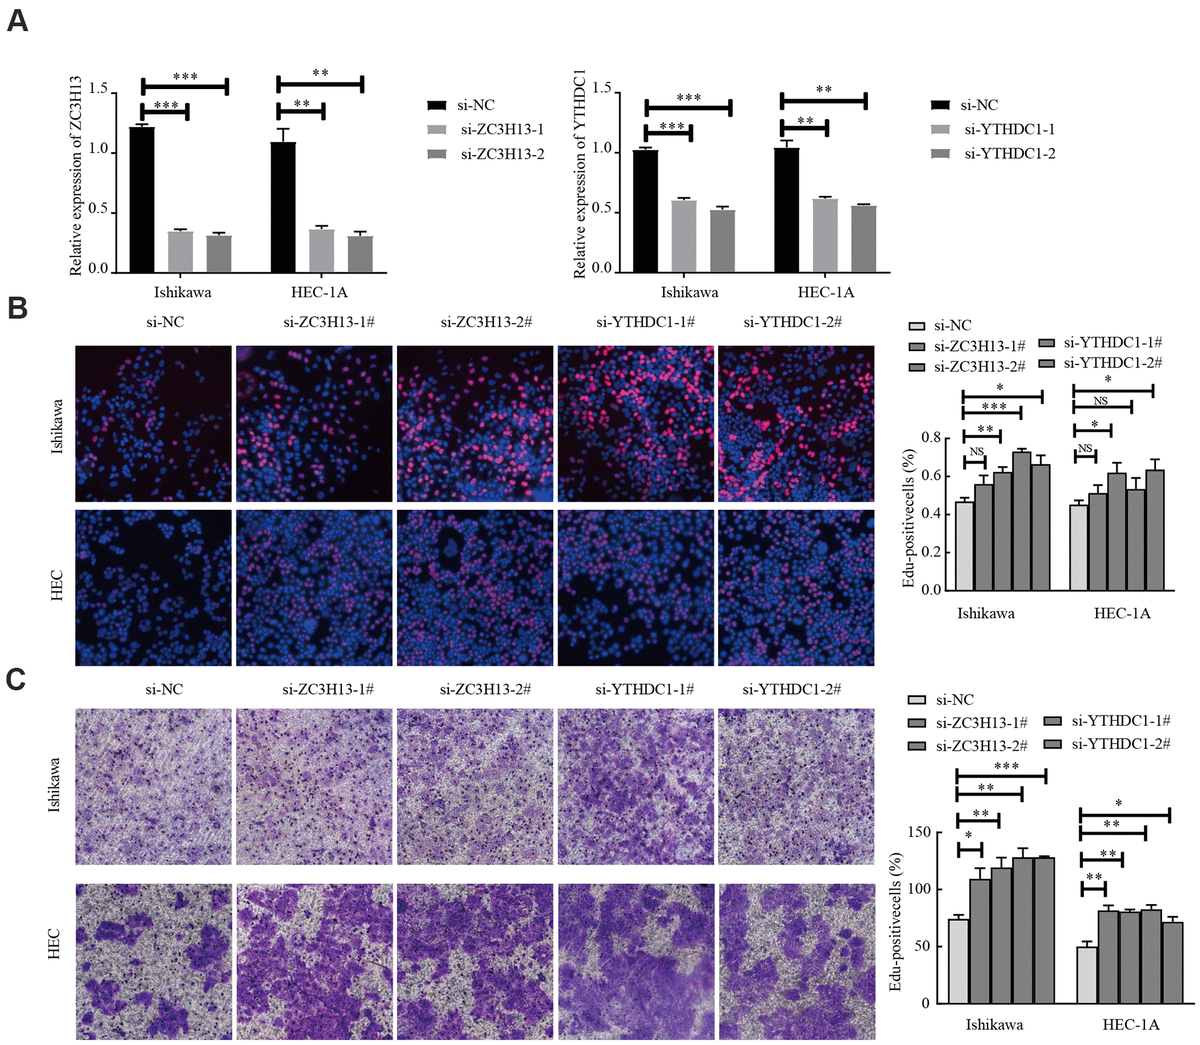 Knockdown of ZC3H13 or YTHDC1 promotes the malignant behavior of Ishikawa and HEC-1A cells. (A) qRT-PCR was used to determine transfection efficiency. (B) The effect of ZC3H13 or YTHDC1 expression on the proliferation of Ishikawa and HEC-1A cells was determined via EdU assays. (C) Transwell assays were used to determine the number of invading cells. Data are presented as the mean ± SEM (n = 3 per group), *P P P 